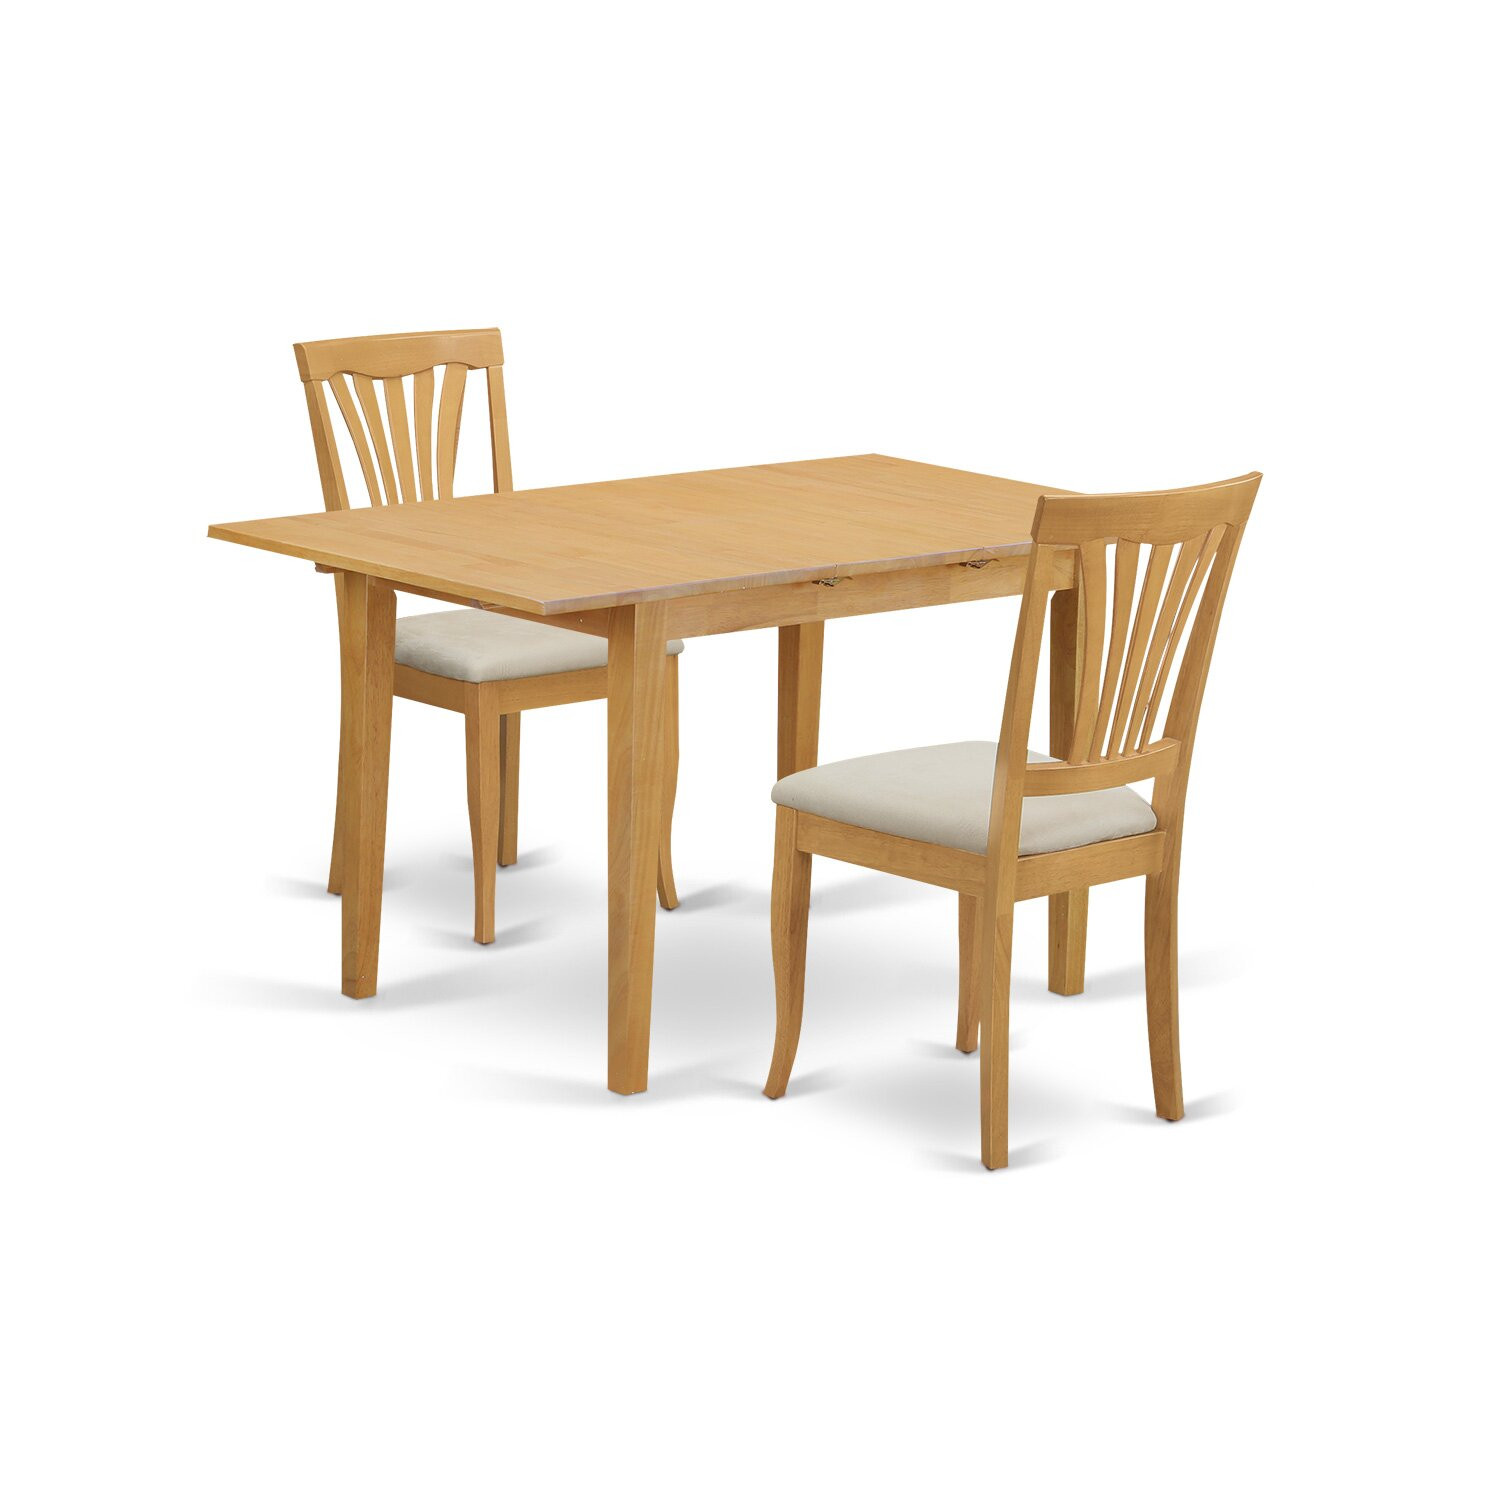 Wayfair Small Kitchen Tables
 East West Norfolk 3 Piece Dining Set & Reviews